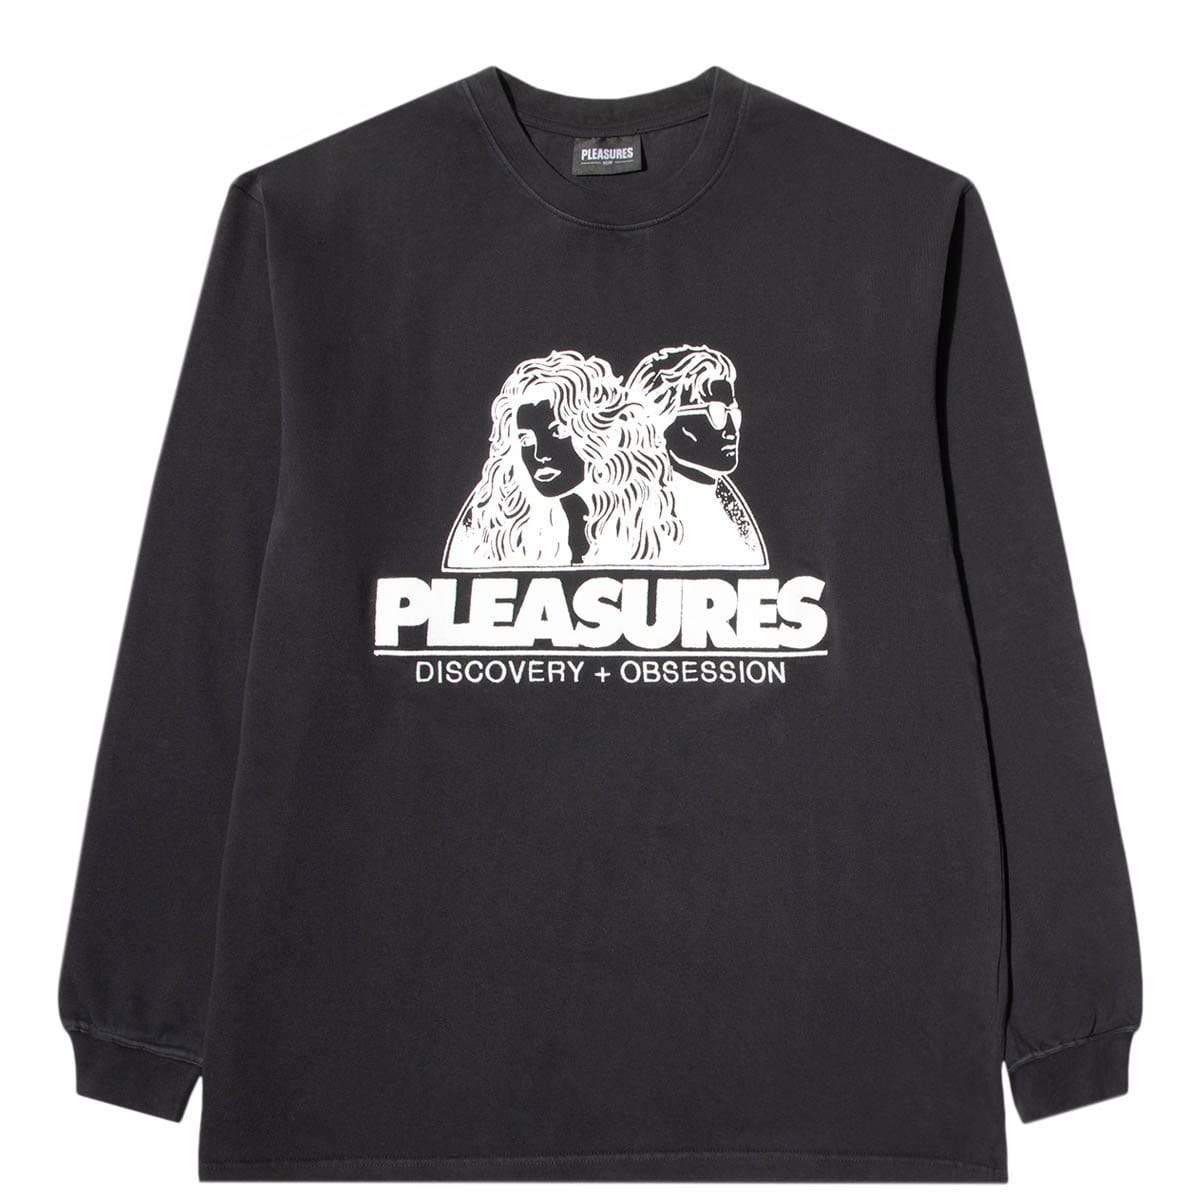 Pleasures T-Shirts DISCOVERY HEAVY WEIGHT SHIRT